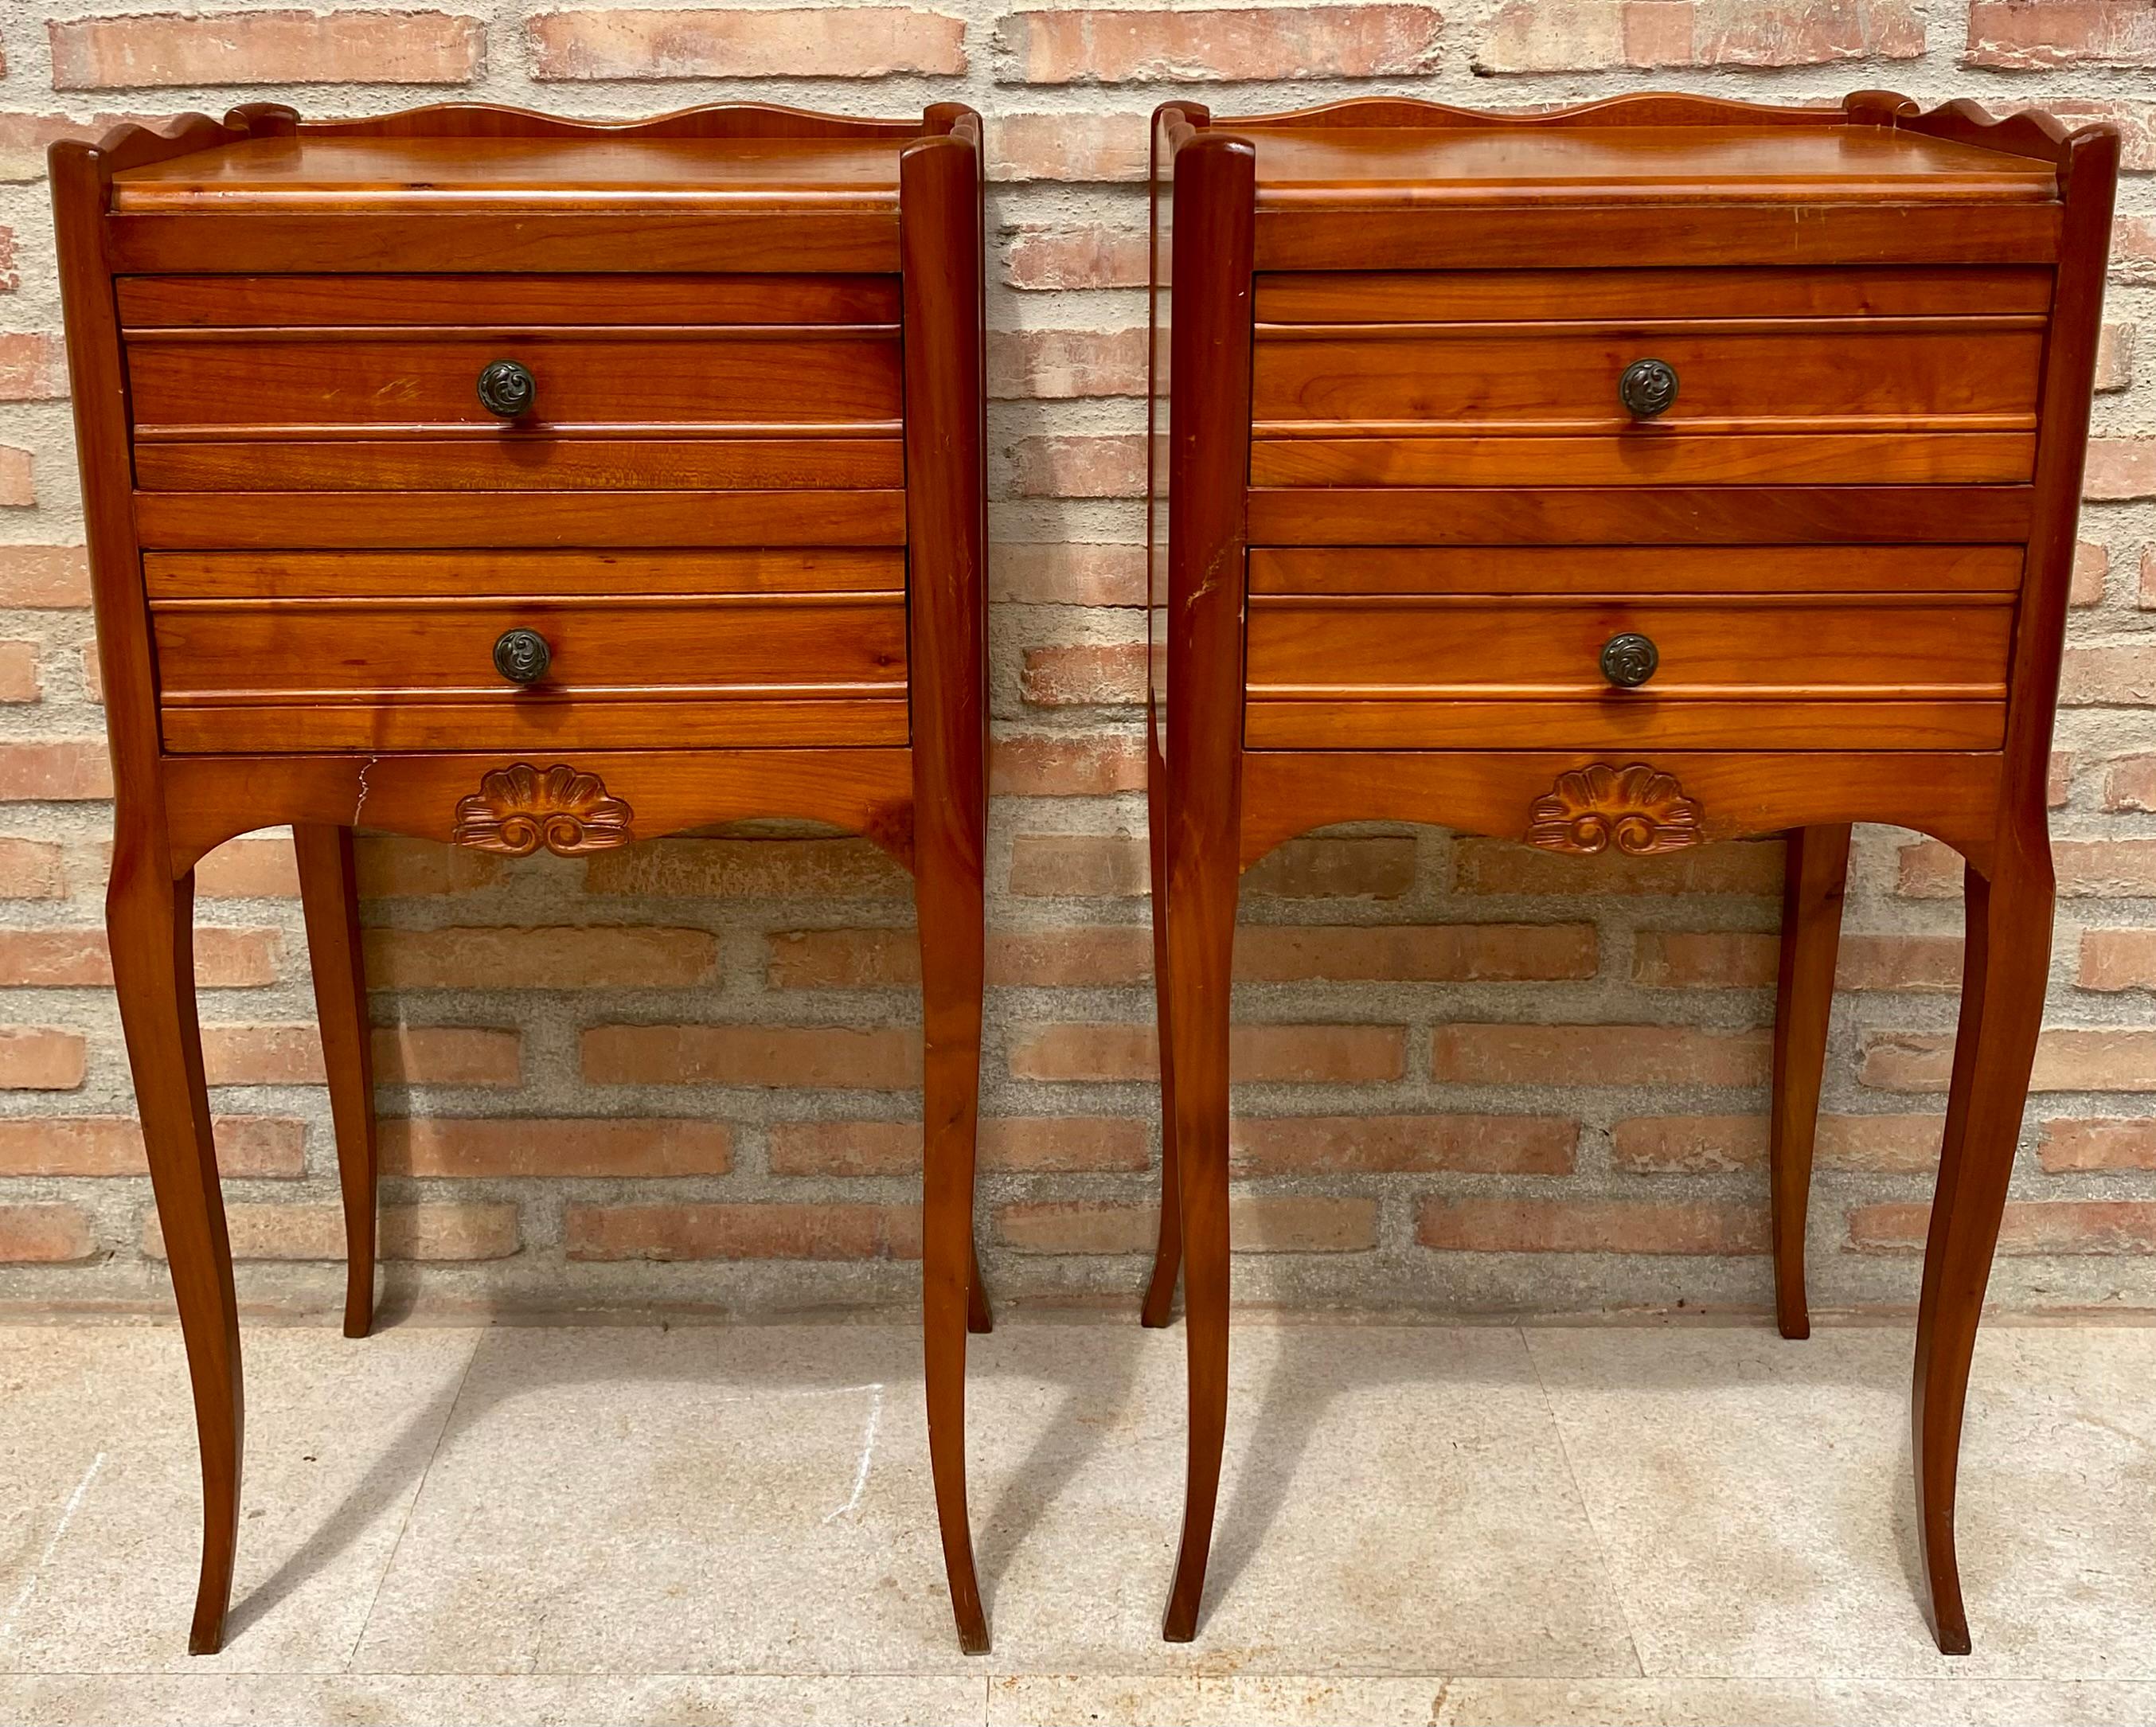 A fine pair of French bedside end tables or nightstands - each Stand featuring a scalloped edge gallery over a frieze of two drawers with brass pulls, apron bottom, and set upon four tapering cabriole legs.